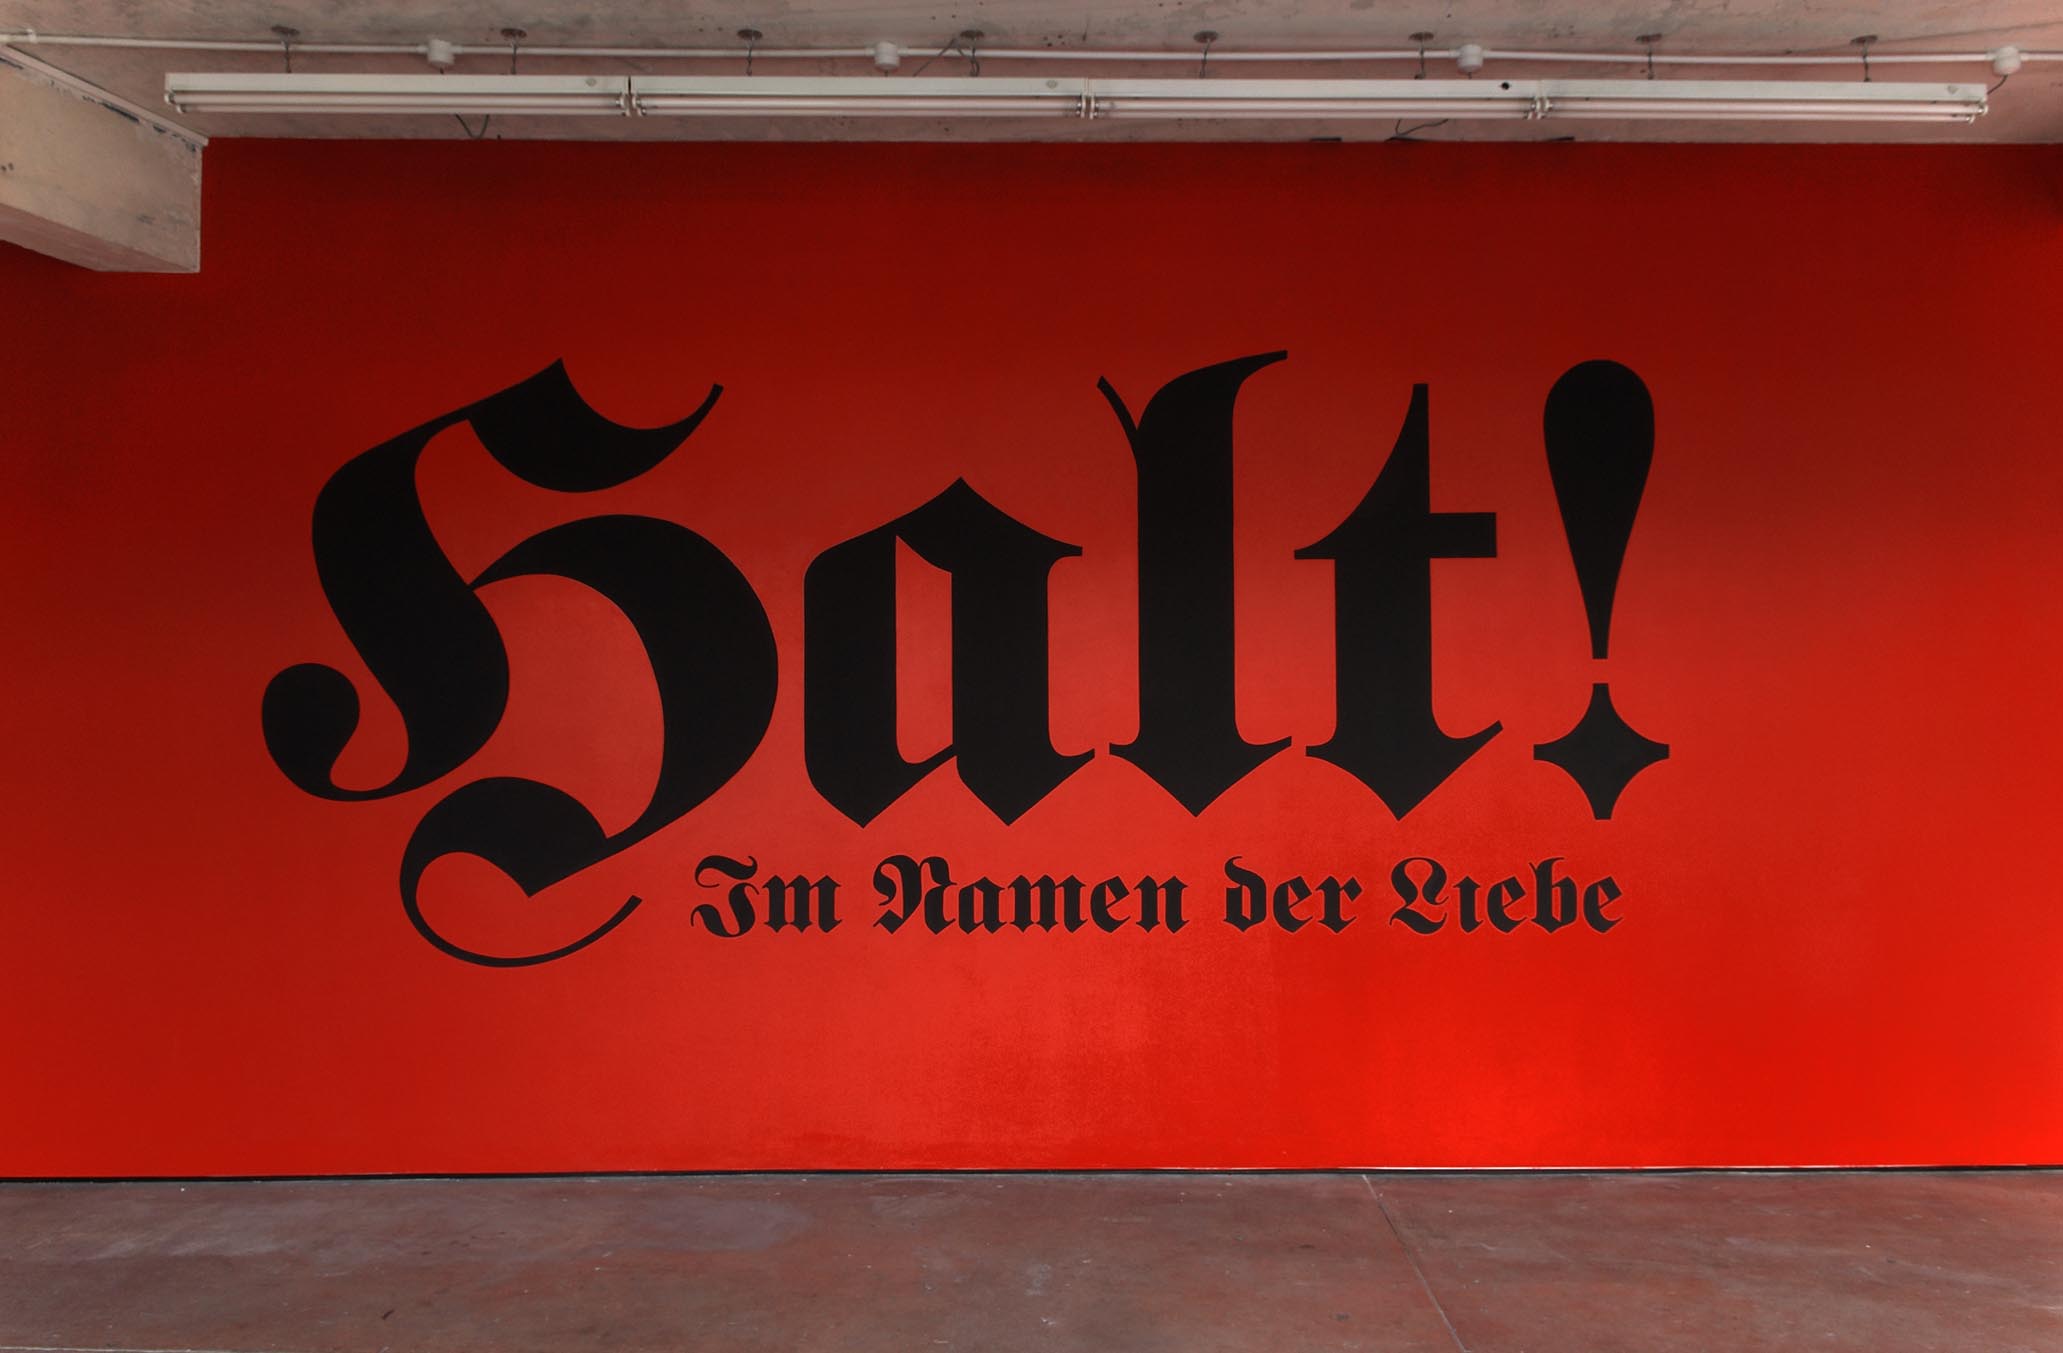      Halt! Im Namen der Liebe (Stop! In the Name of Love)   2008   wall painting   Dimensions Variable  